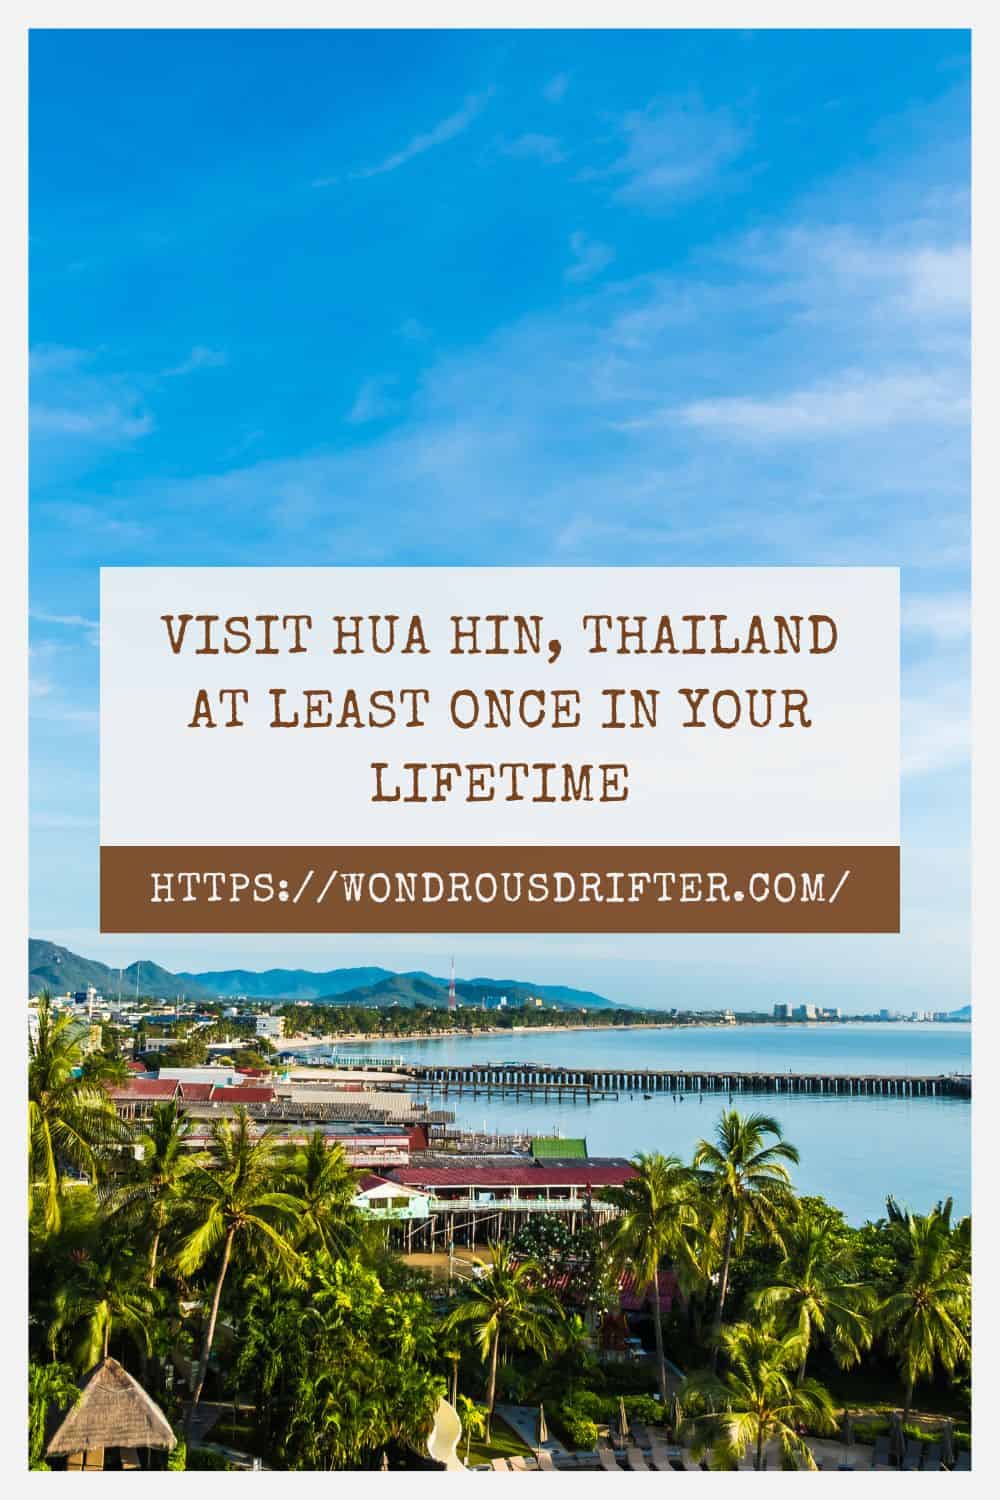 Visit Hua Hin Thailand at least once in your lifetime